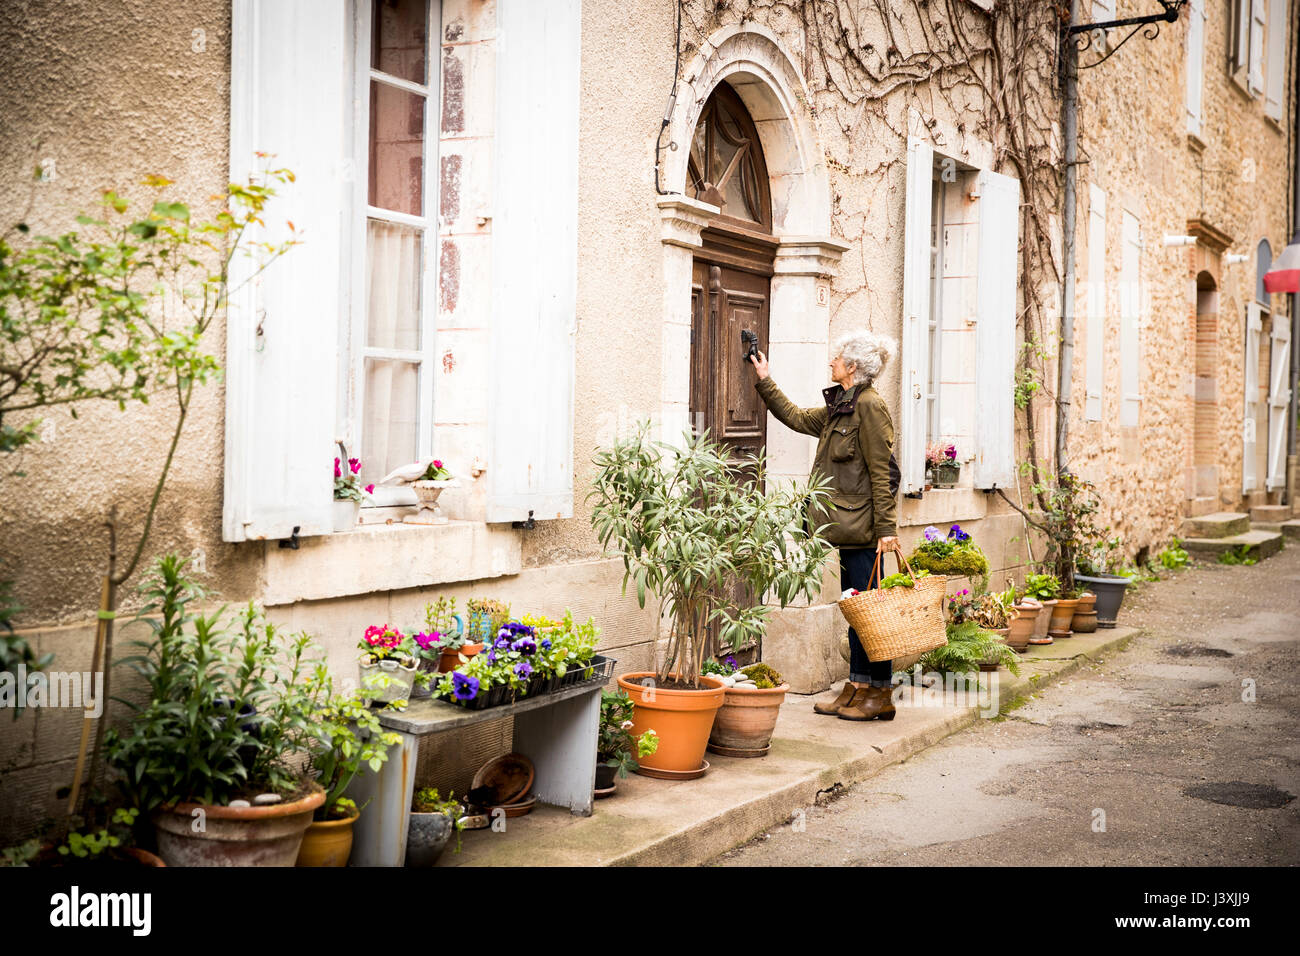 Woman knocking on door, Bruniquel, France Stock Photo